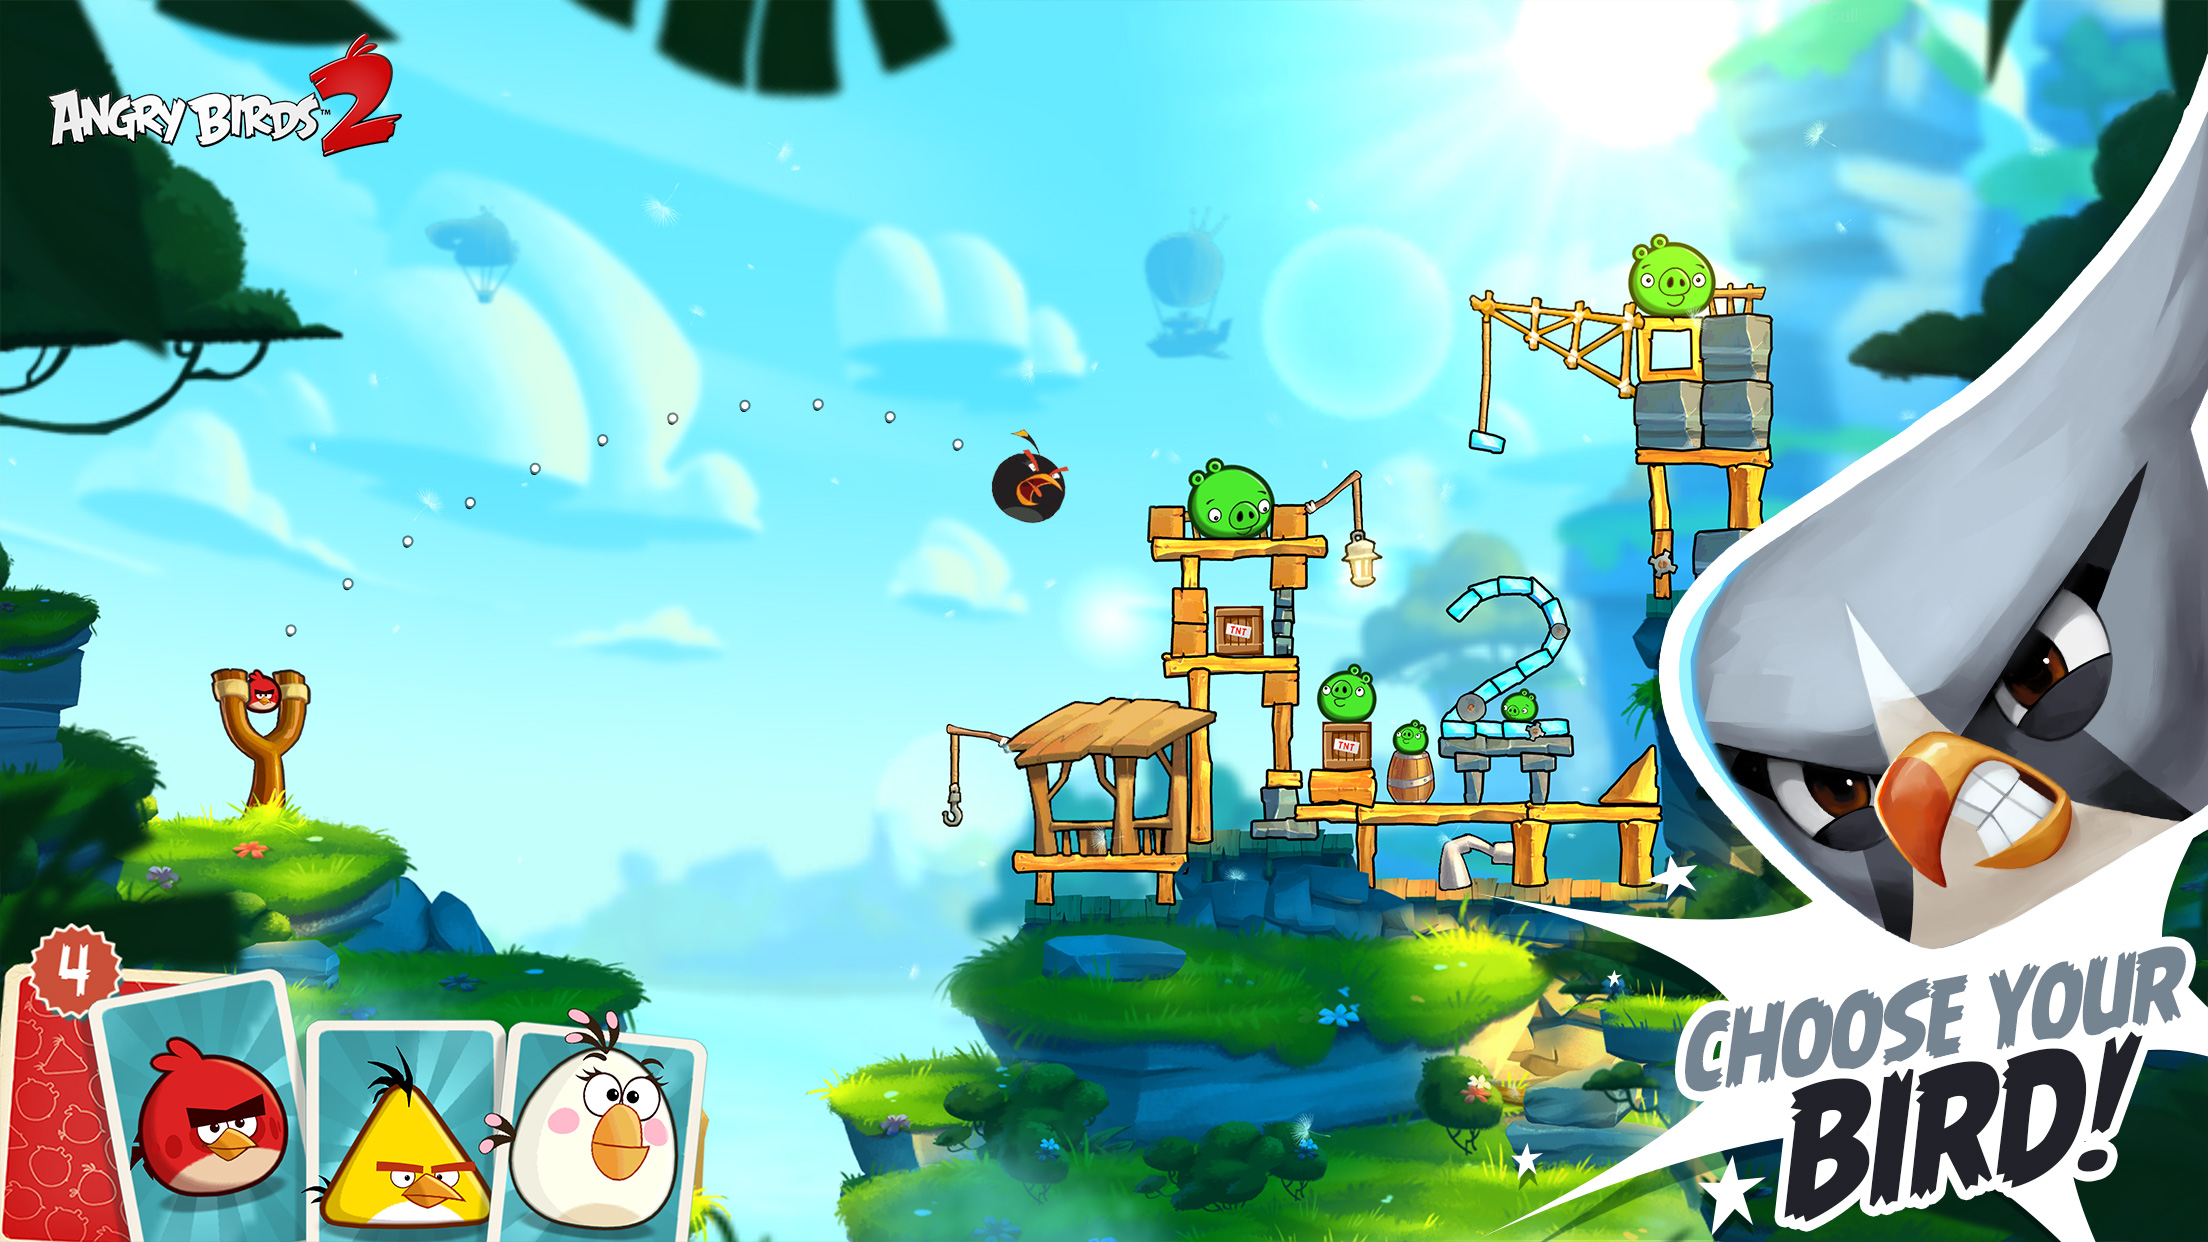 Angry Birds is a success story revolving around business partnerships.